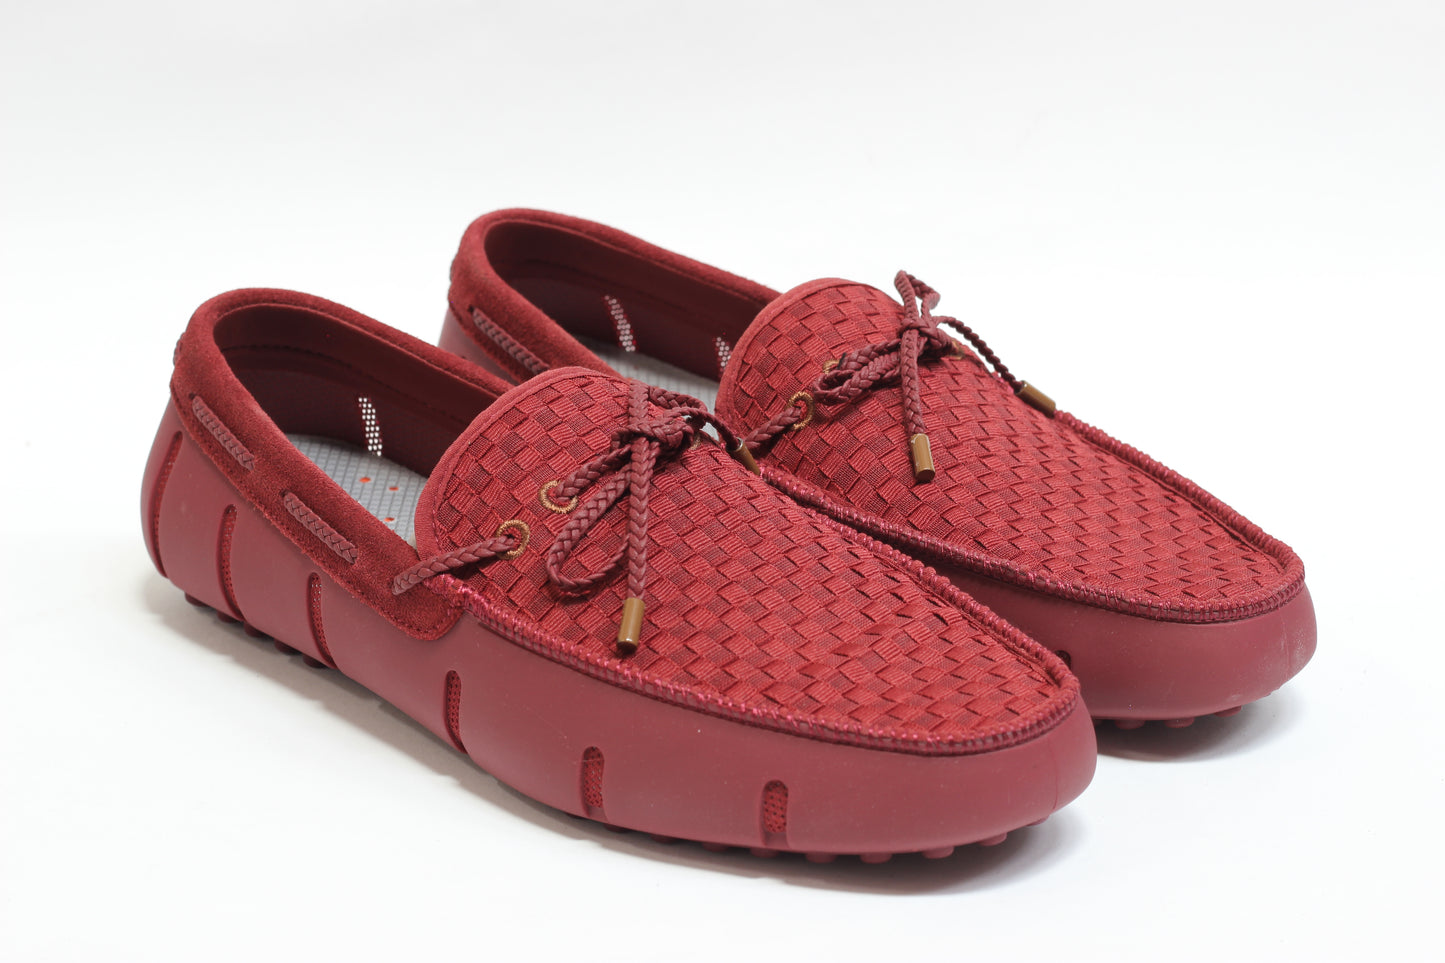 Swims - Lace Loafer Woven